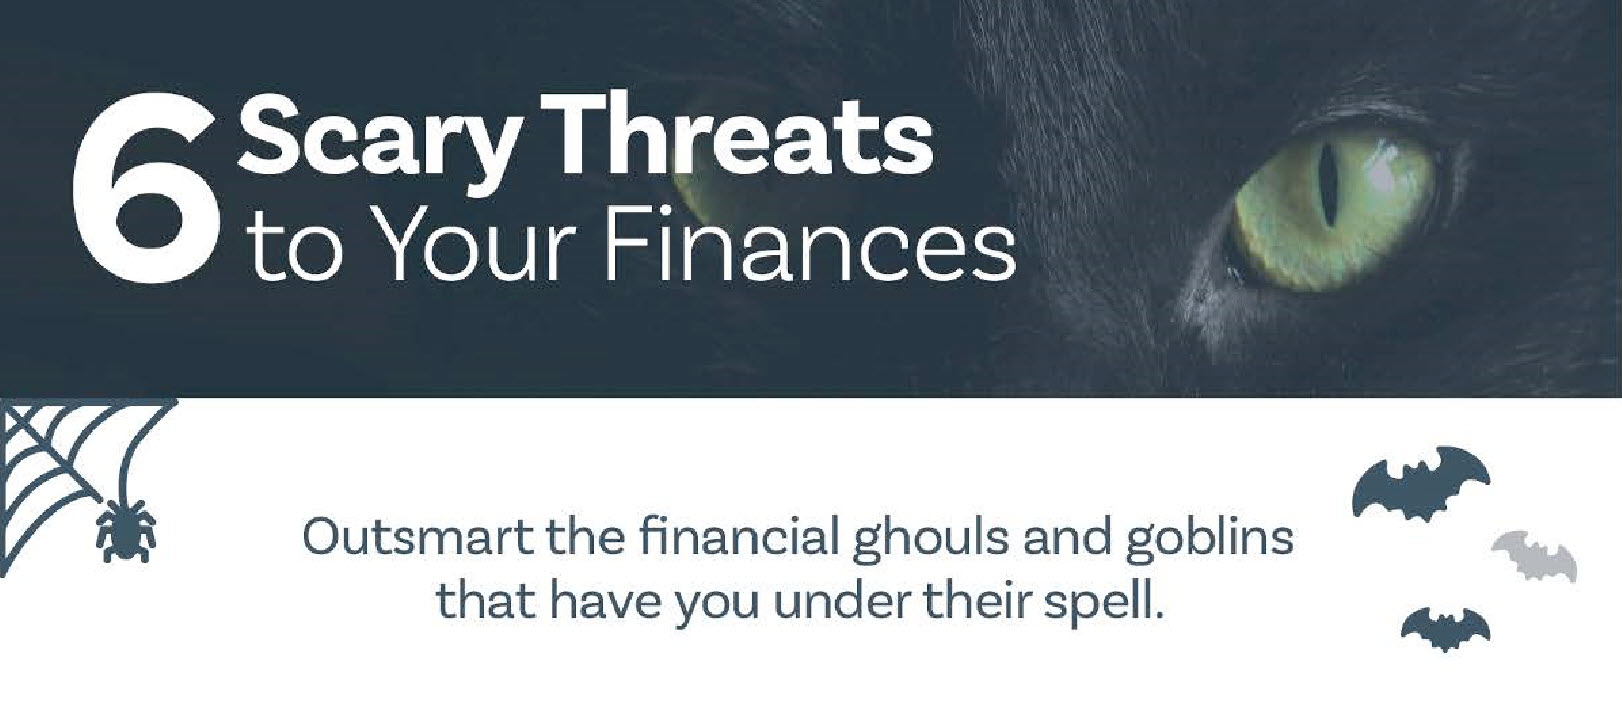 6 Scary Threats to Your Finances header image